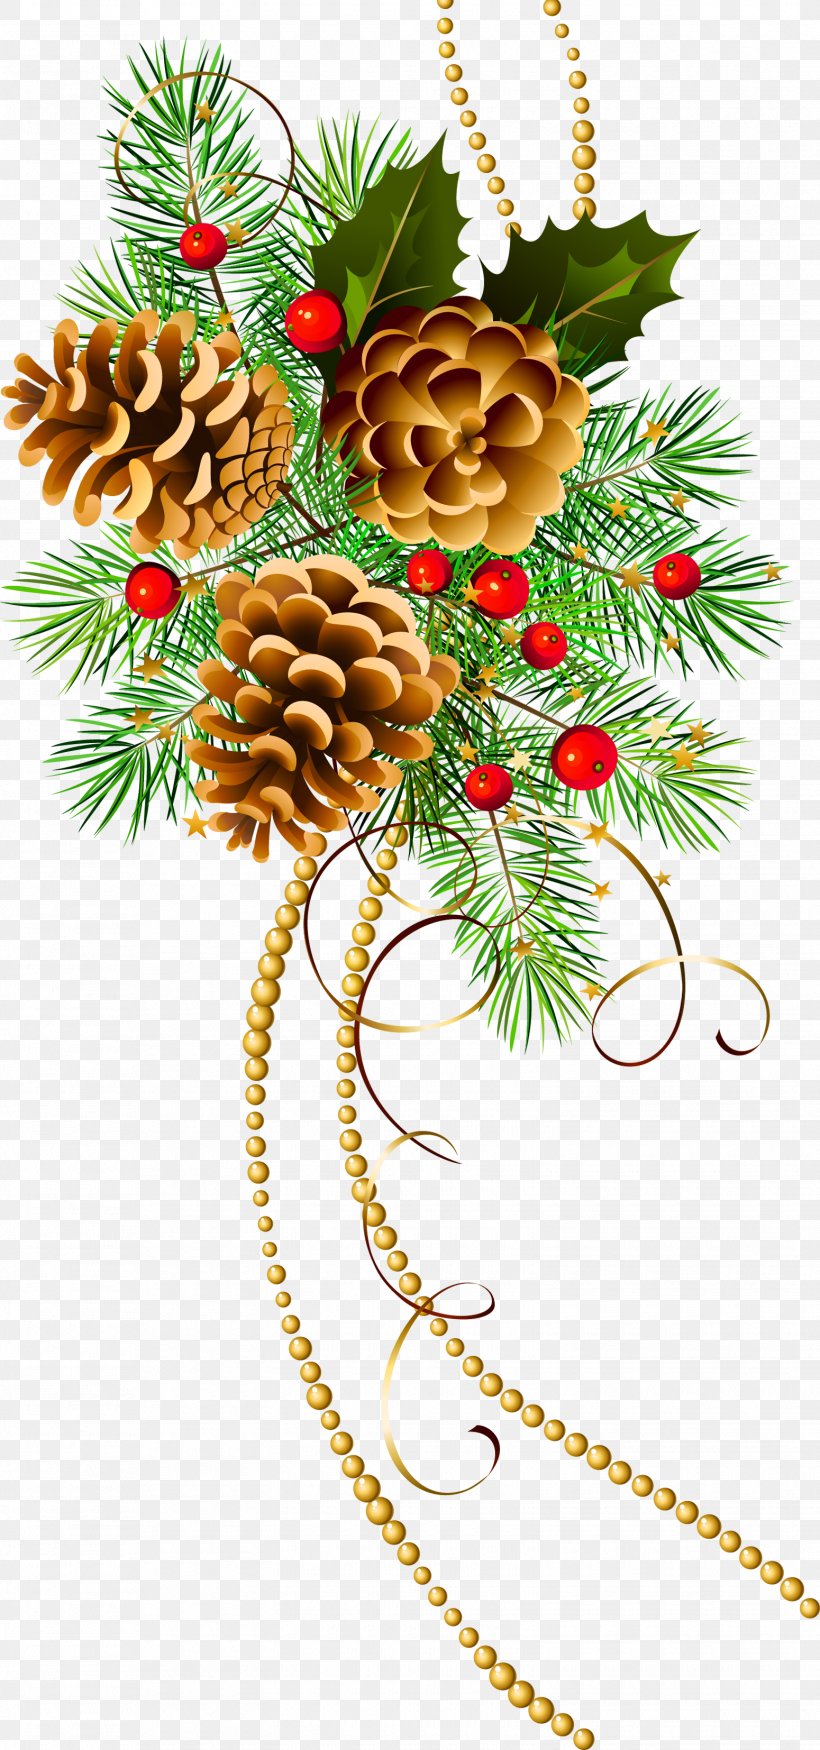 Christmas Decoration Christmas Ornament Christmas Tree Clip Art, PNG, 1550x3309px, Christmas, Branch, Christmas Decoration, Christmas Ornament, Christmas Tree Download Free